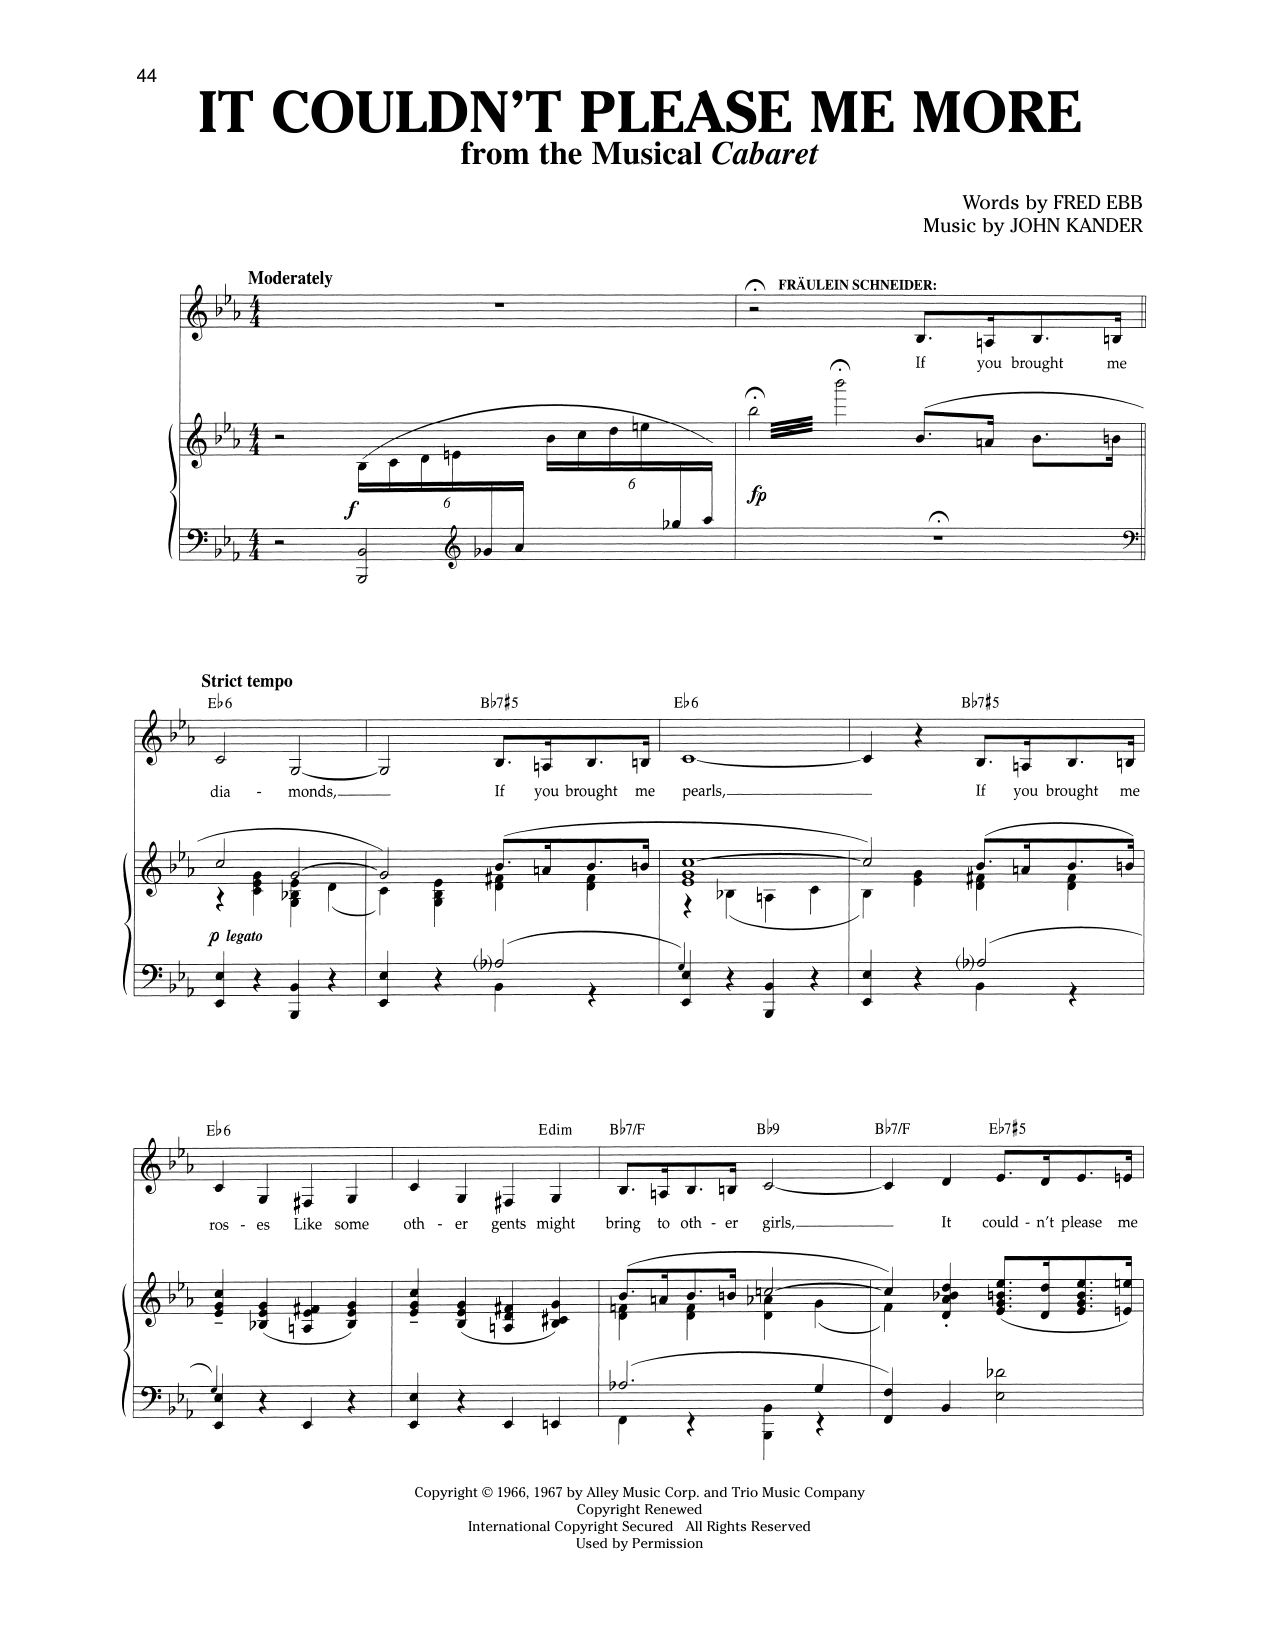 Download Kander & Ebb It Couldn't Please Me More (from Cabare Sheet Music